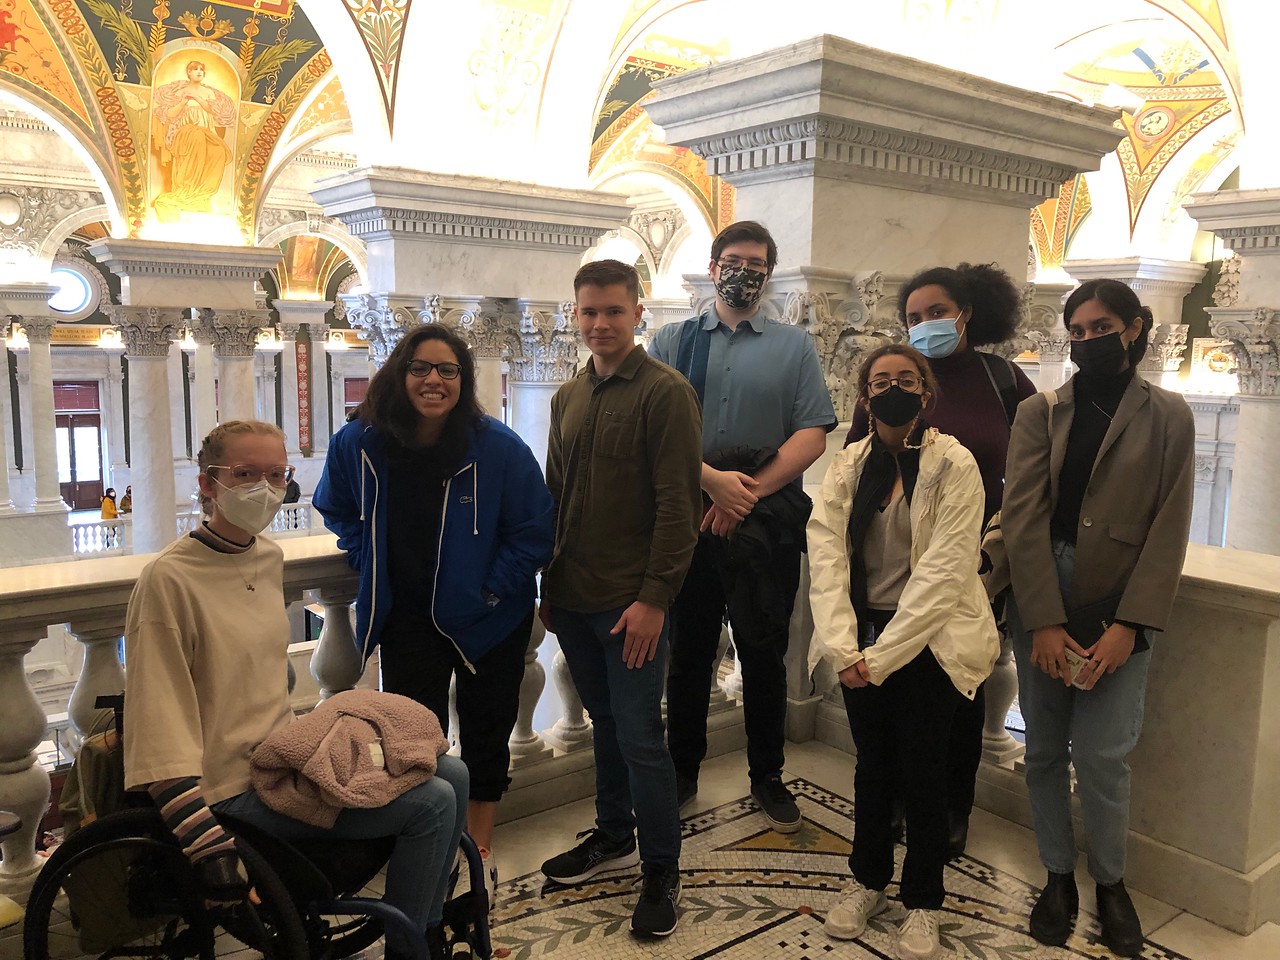 A group of Pillars of Research students pose for a photo in the Library of Congress.